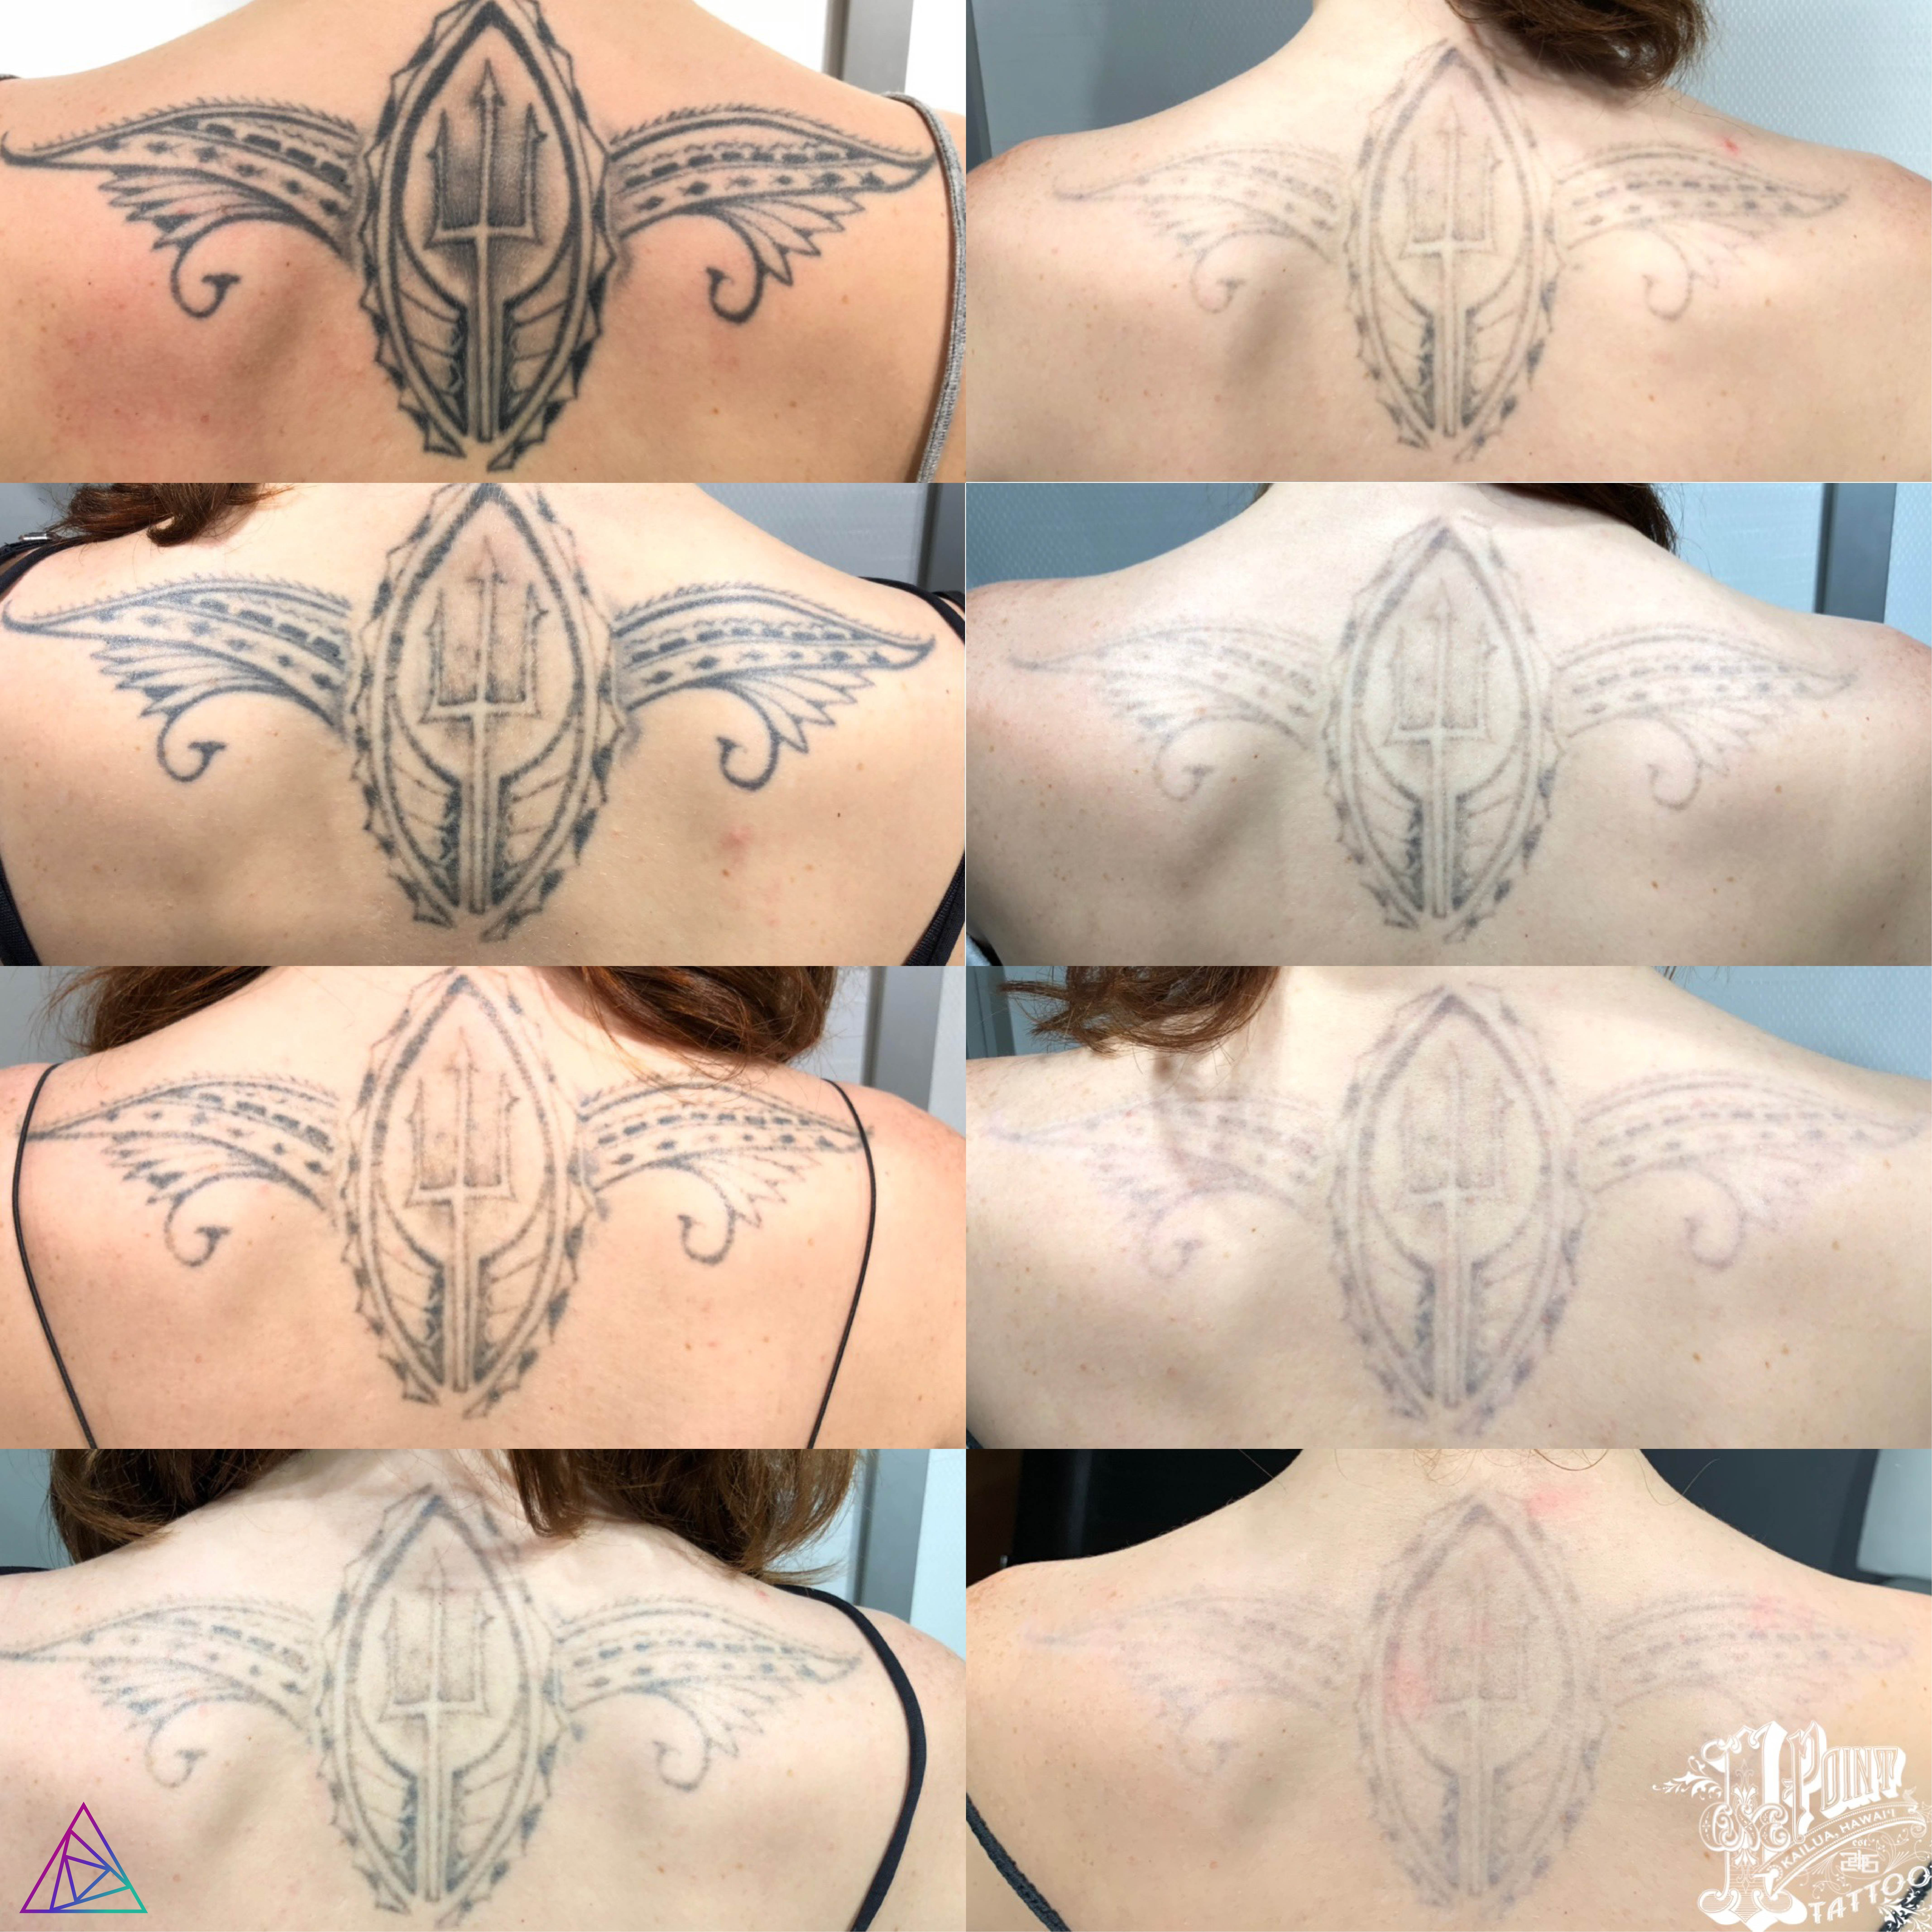 Announcing the Winner: See 1 Point Tattoo's Winning Cover-Up/Lightening  Photos